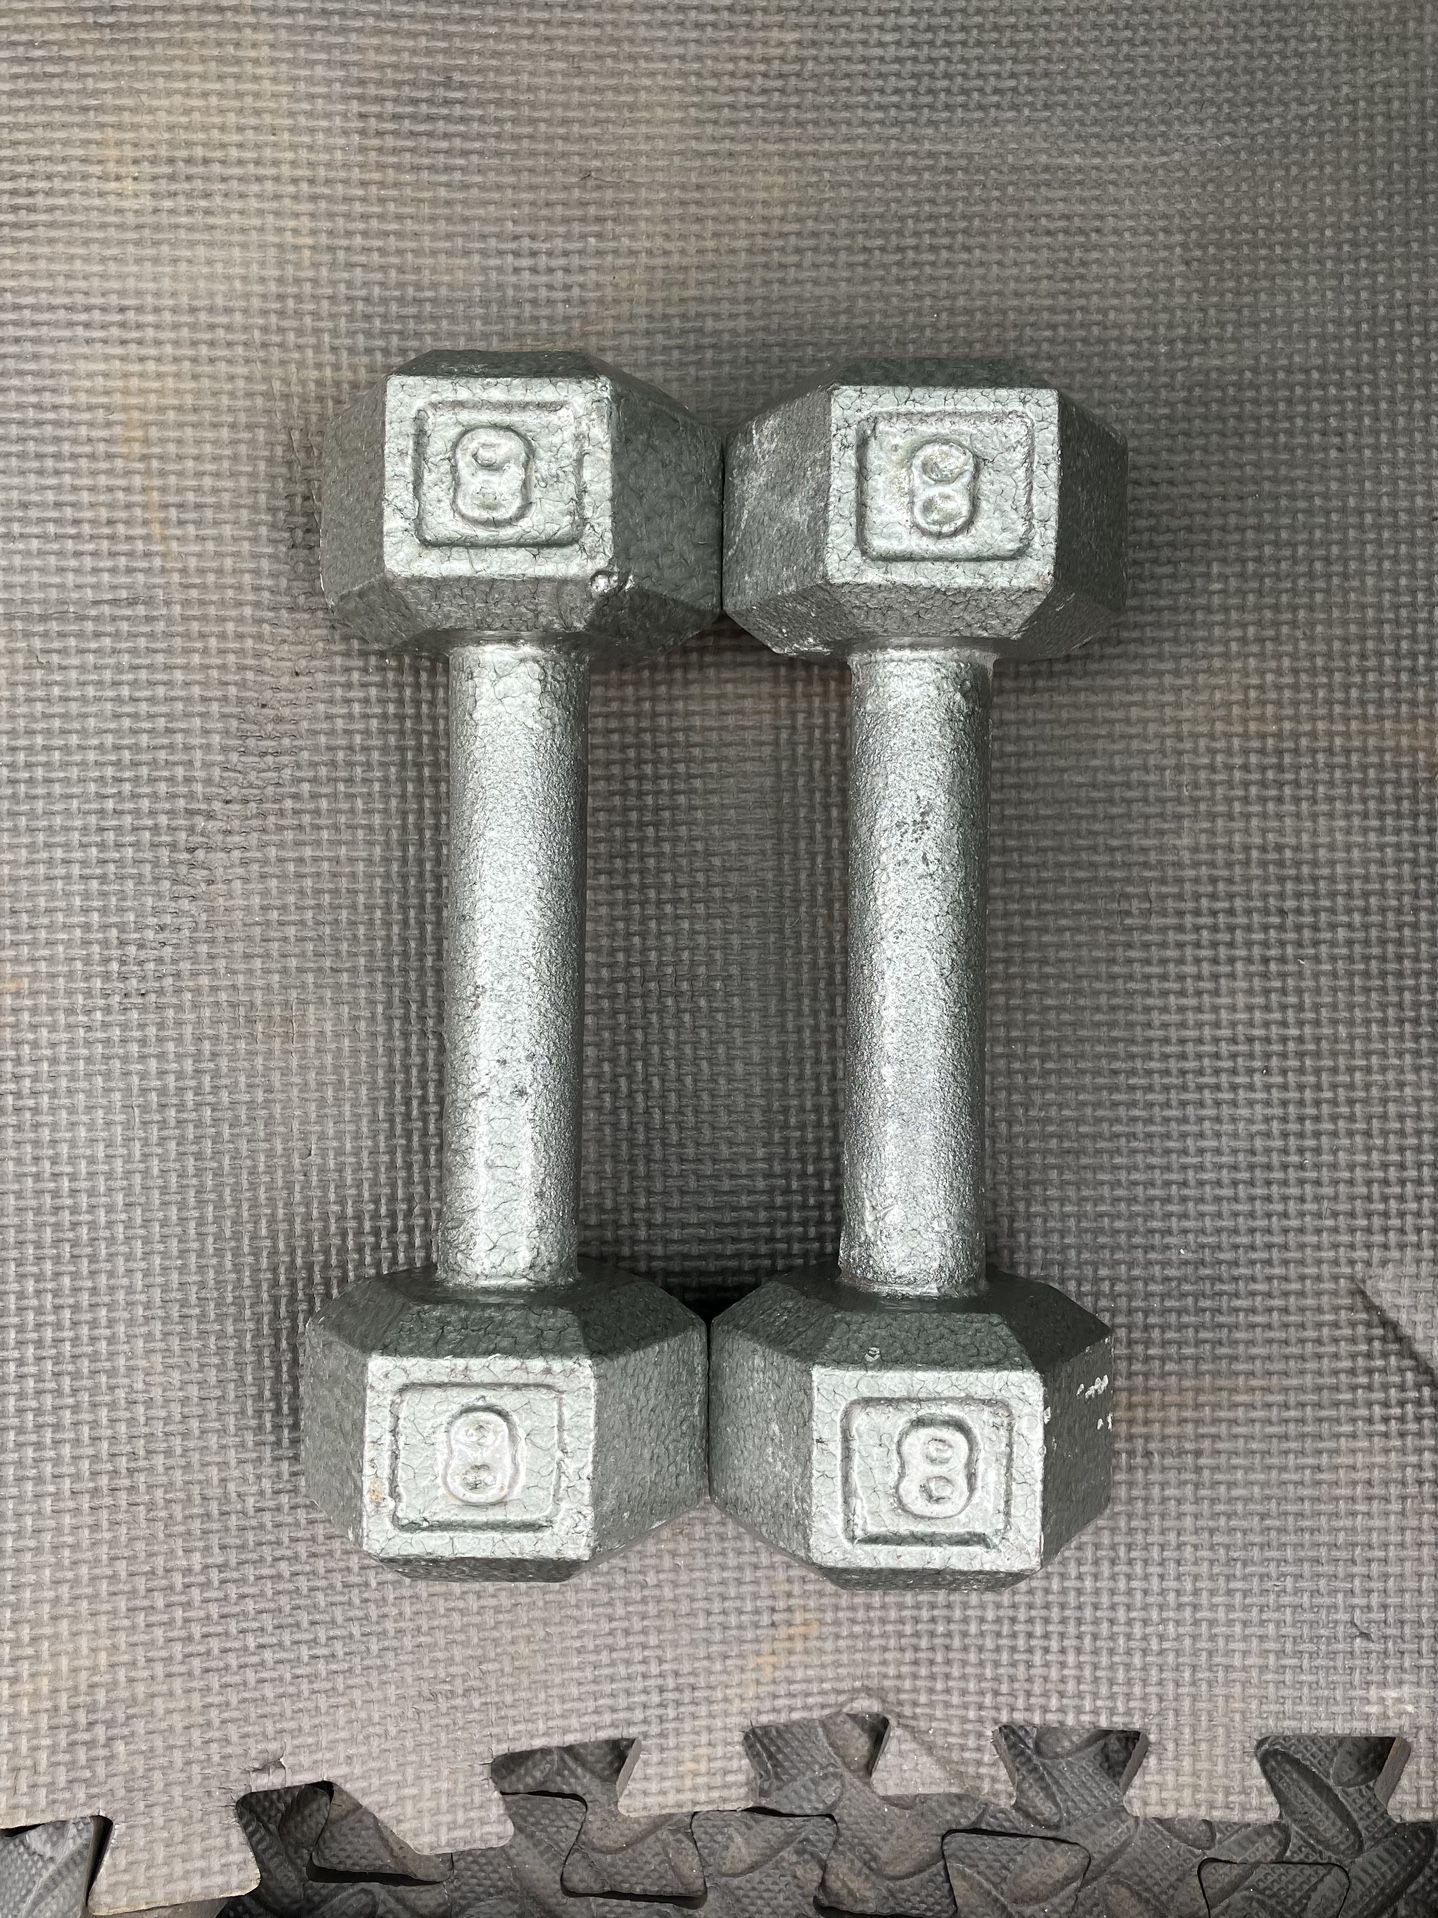 8 lb dumbbells dumbbell set 16 lbs total cast iron hex weights weight pair pounds pound 8lb 8lbs